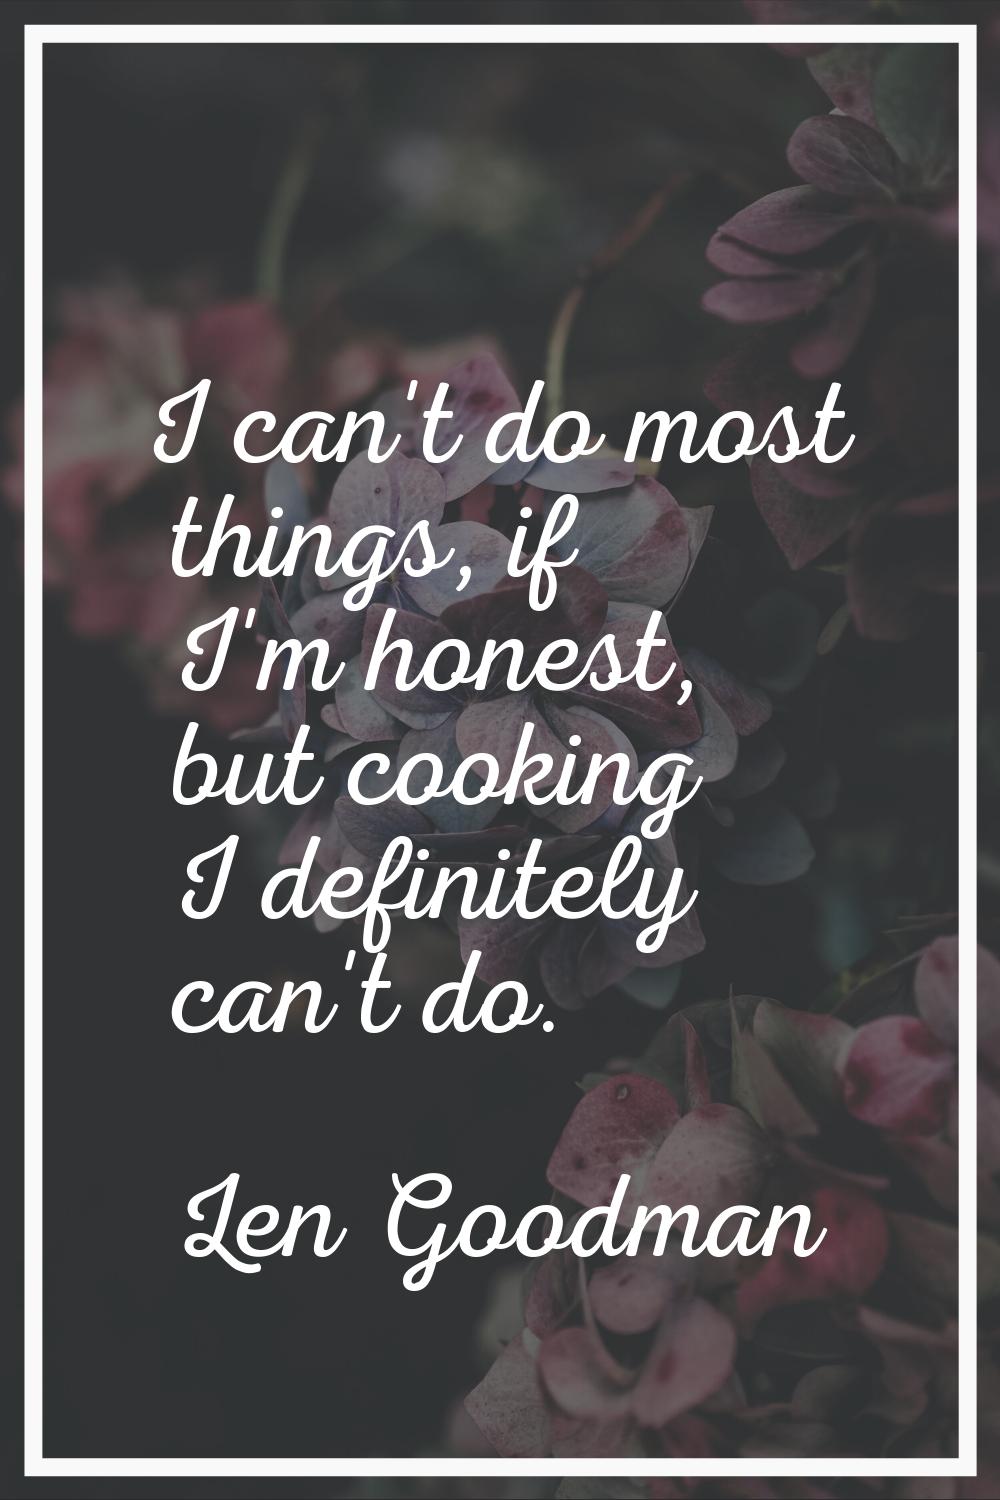 I can't do most things, if I'm honest, but cooking I definitely can't do.